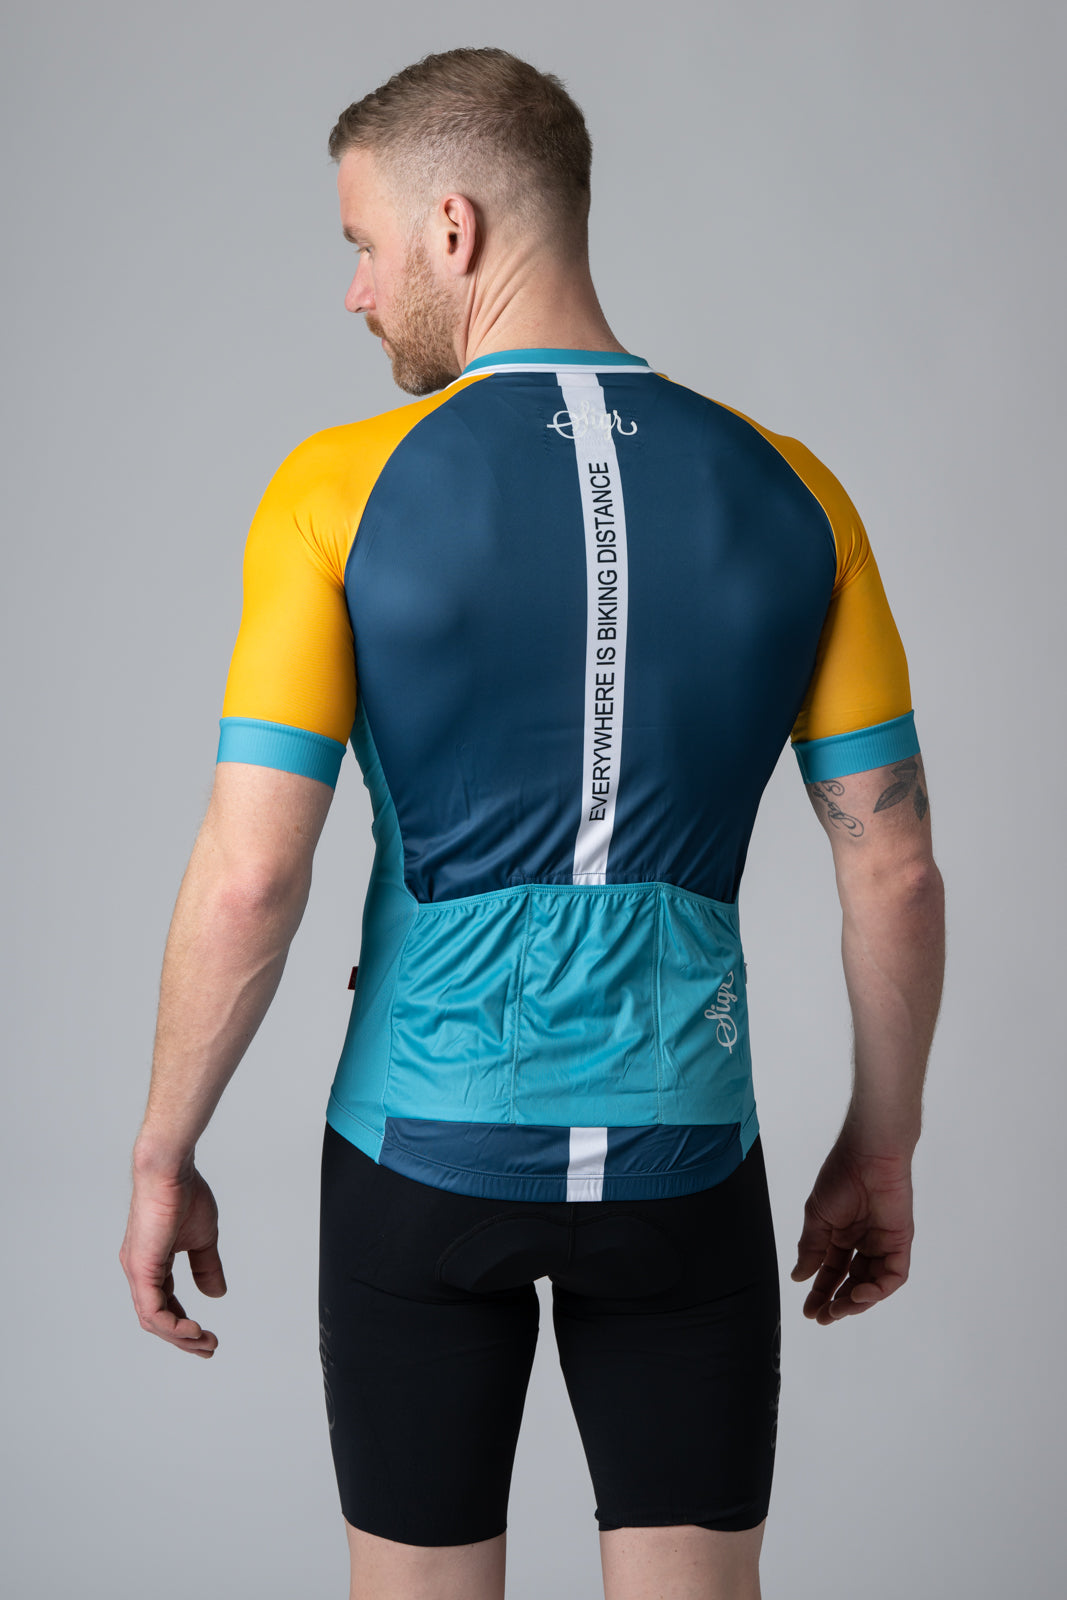 Cycling Jersey for Men -'Descent' by Sigr Swedish Bikewear